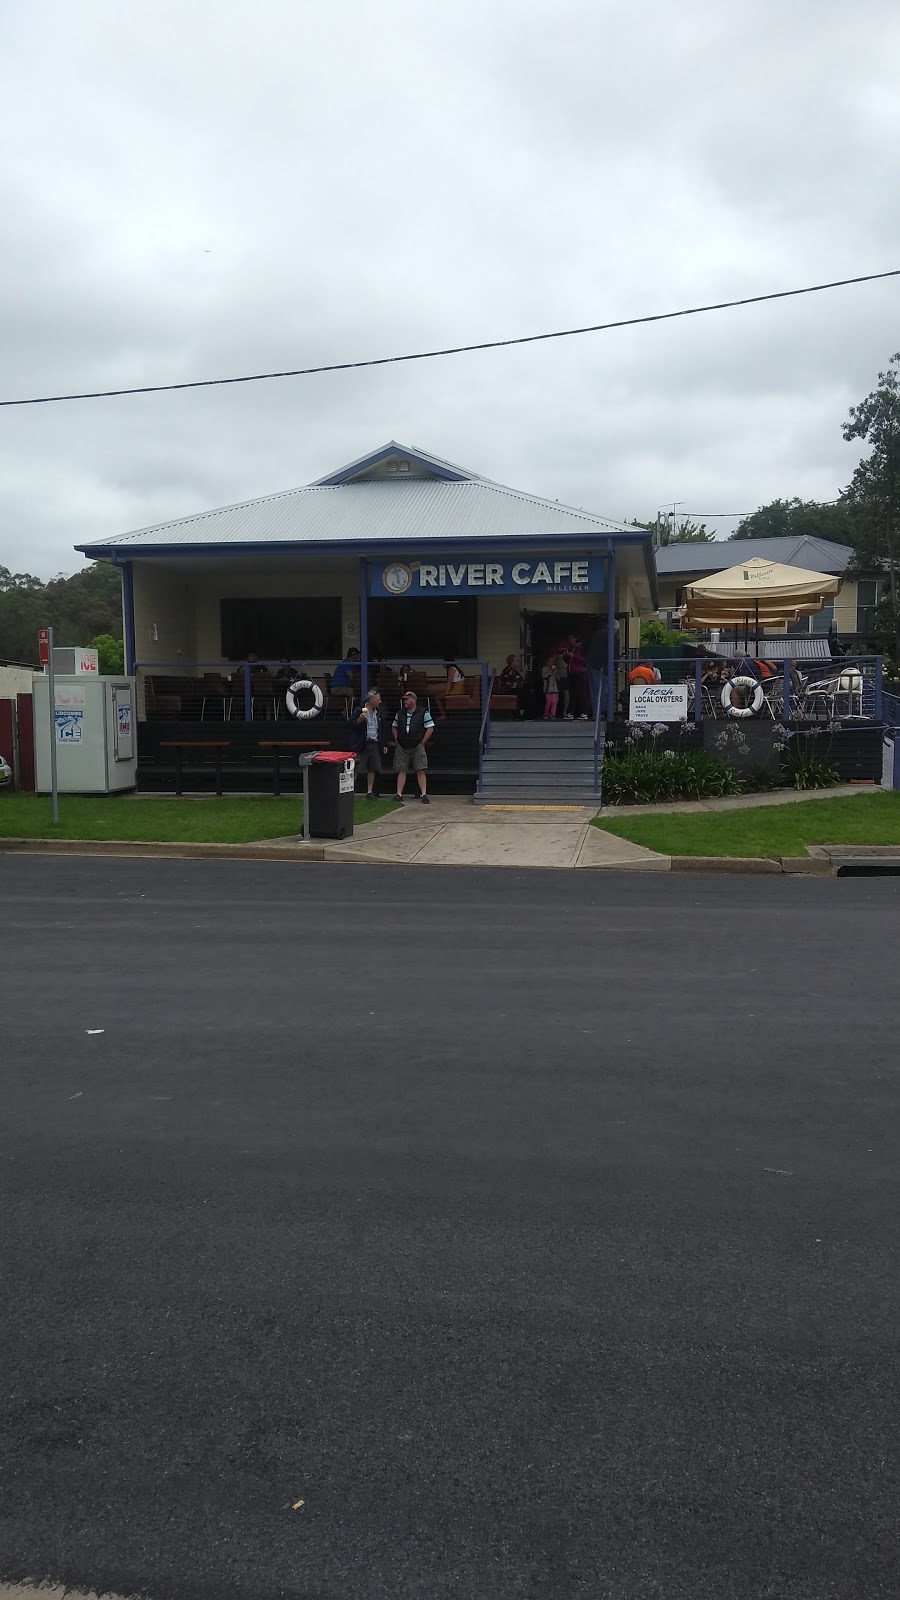 The River Cafe | cafe | 1 Wharf St, Nelligen NSW 2536, Australia | 0244781153 OR +61 2 4478 1153